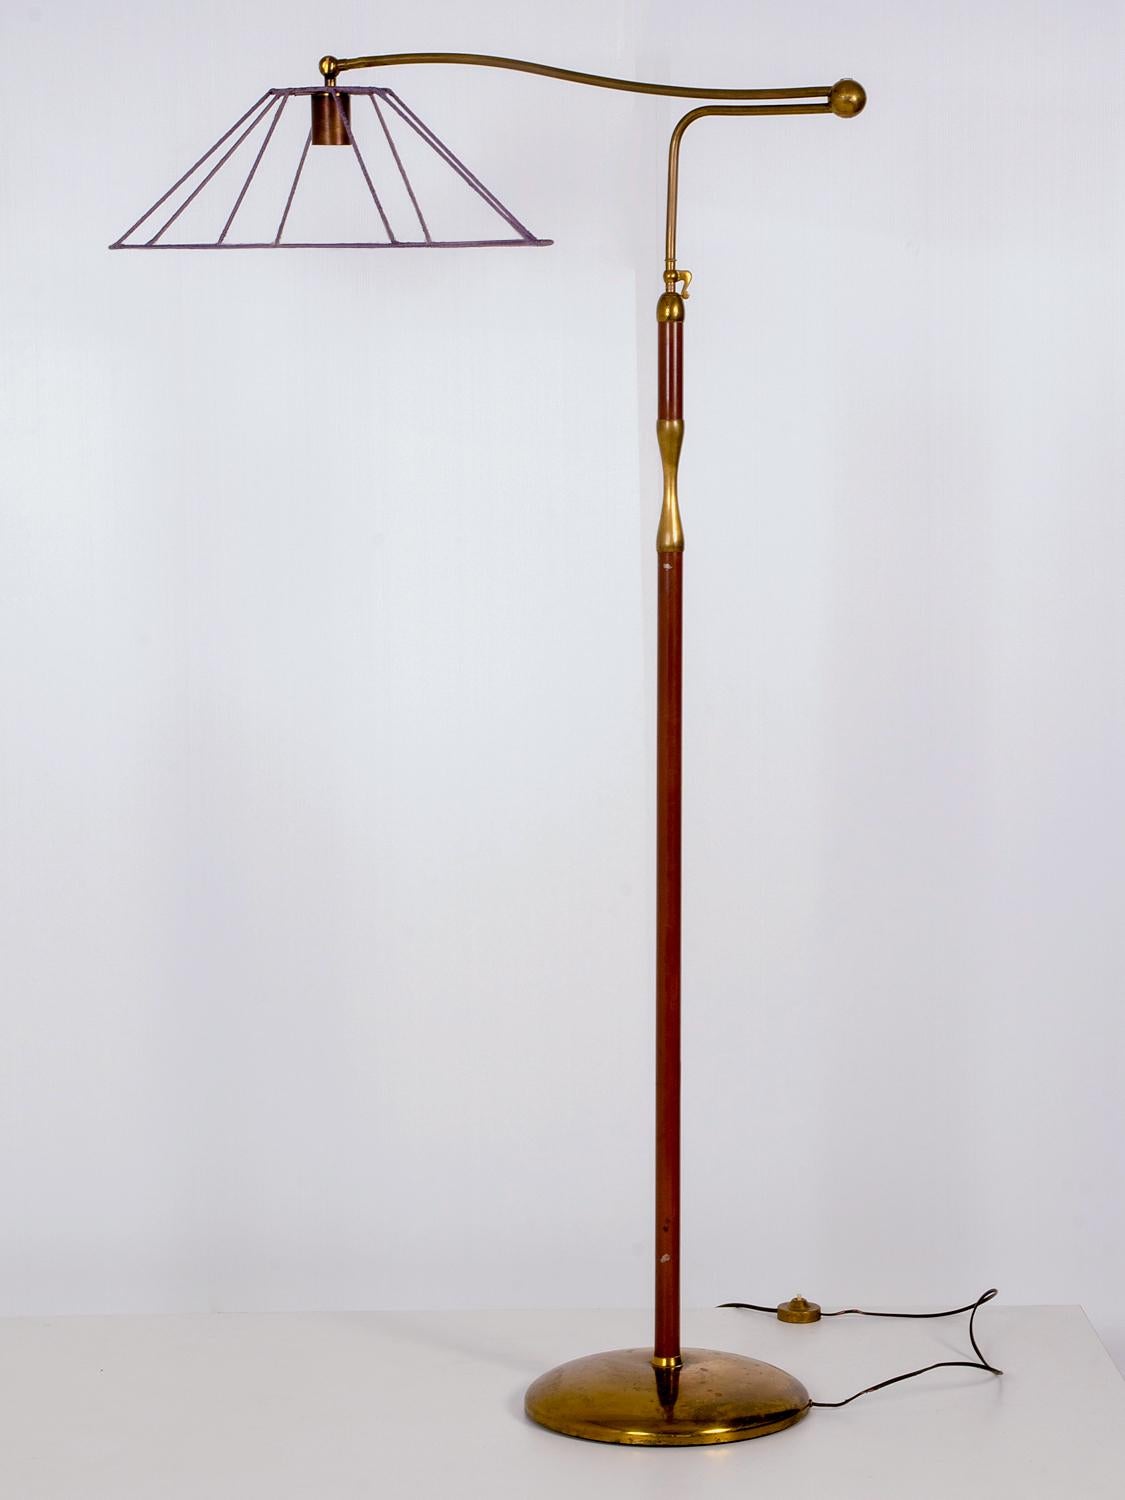 This is the historical floor lamp ‘Bridge’, one of the first creations of Angelo Lelii for Arredoluce in the 1950s.
The structure is a tubolar steel partially lacquered and finished with brass details, equipped with a repositionable arm.
The conic